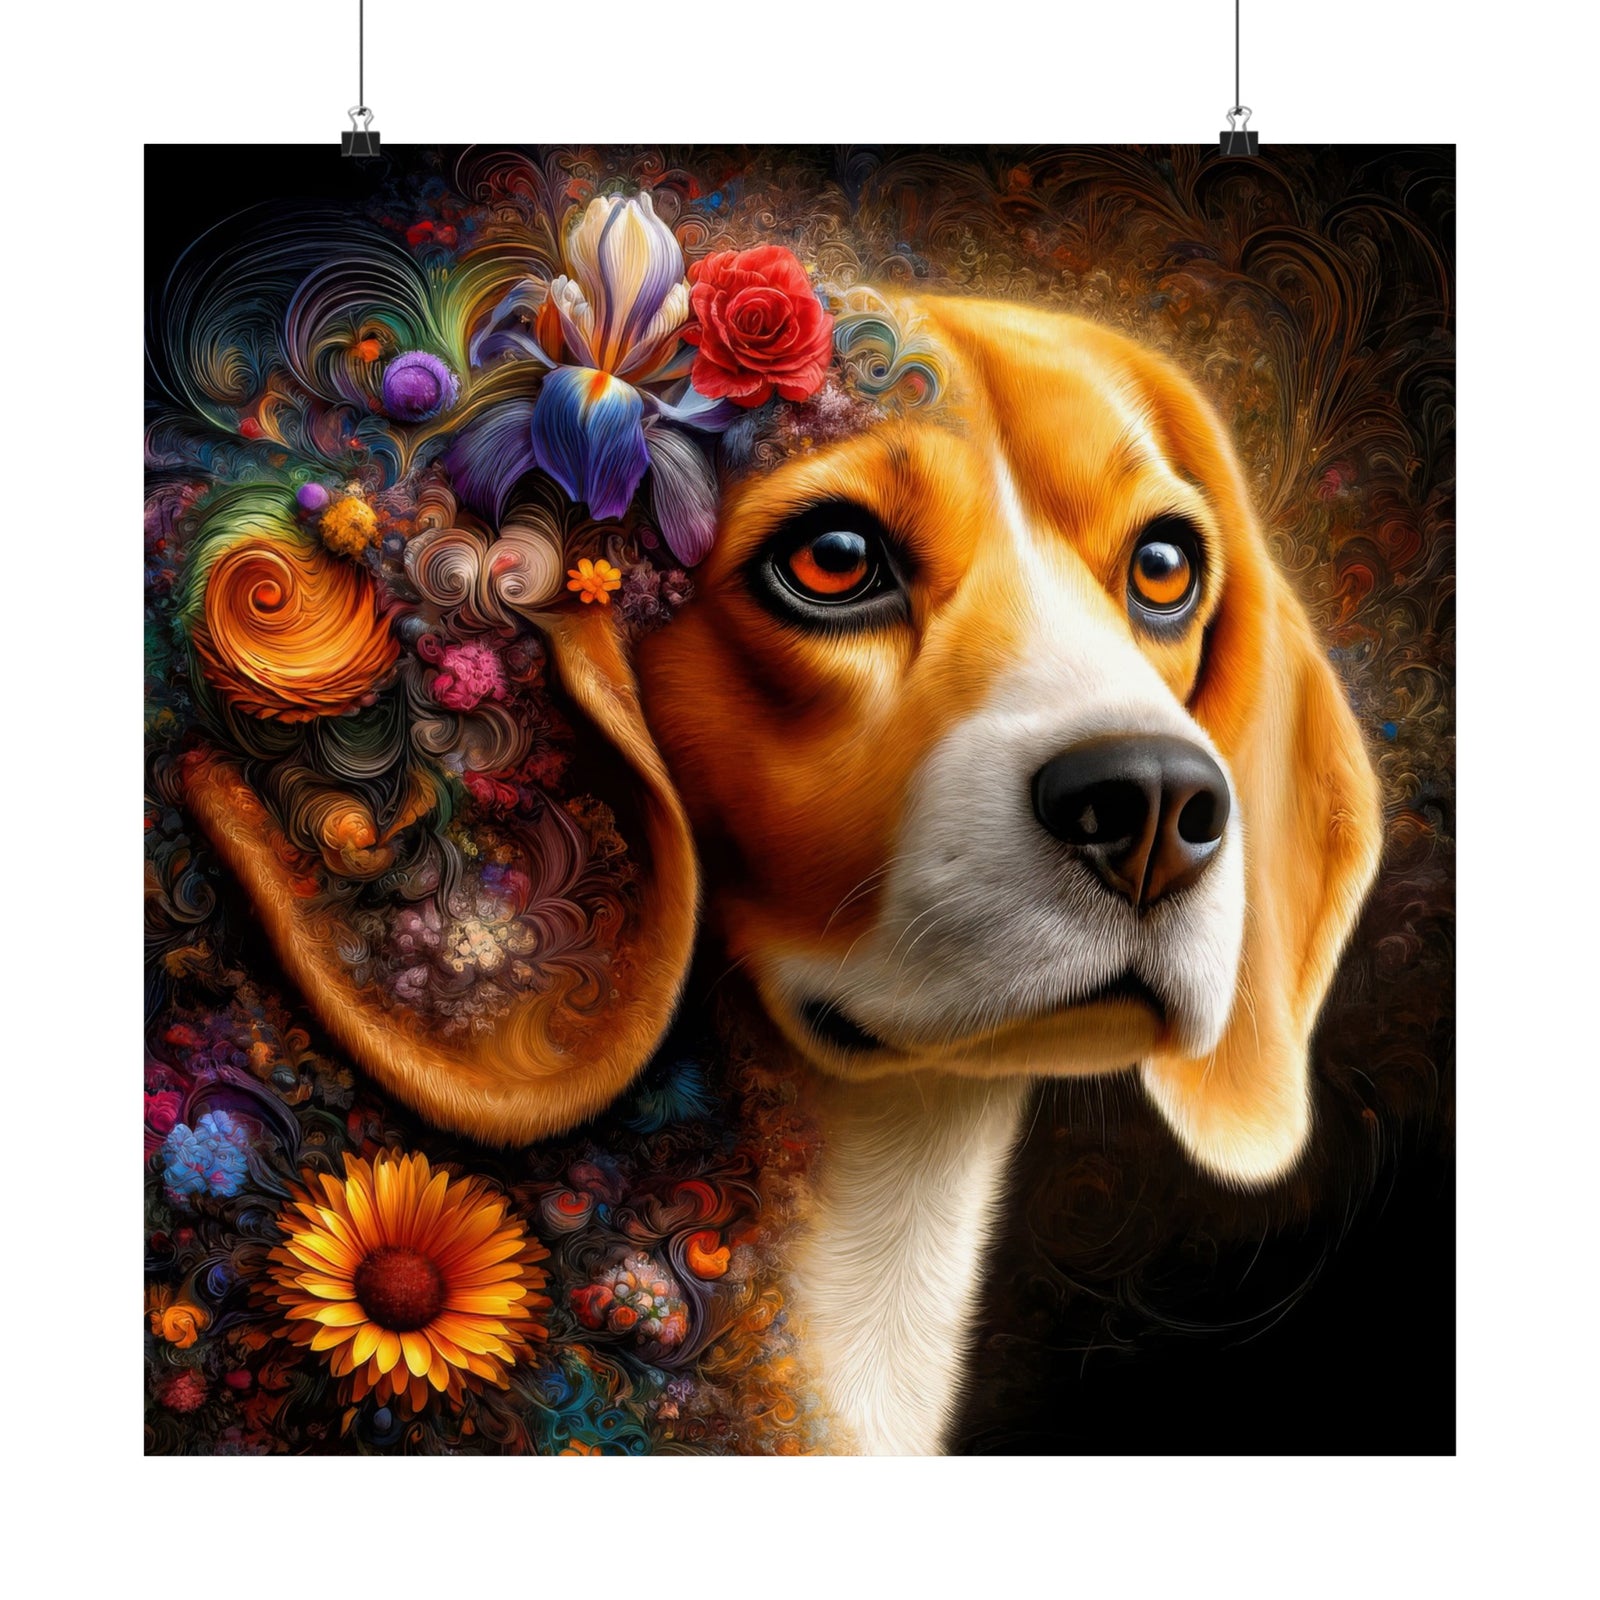 The Beagle's Bouquet Poster